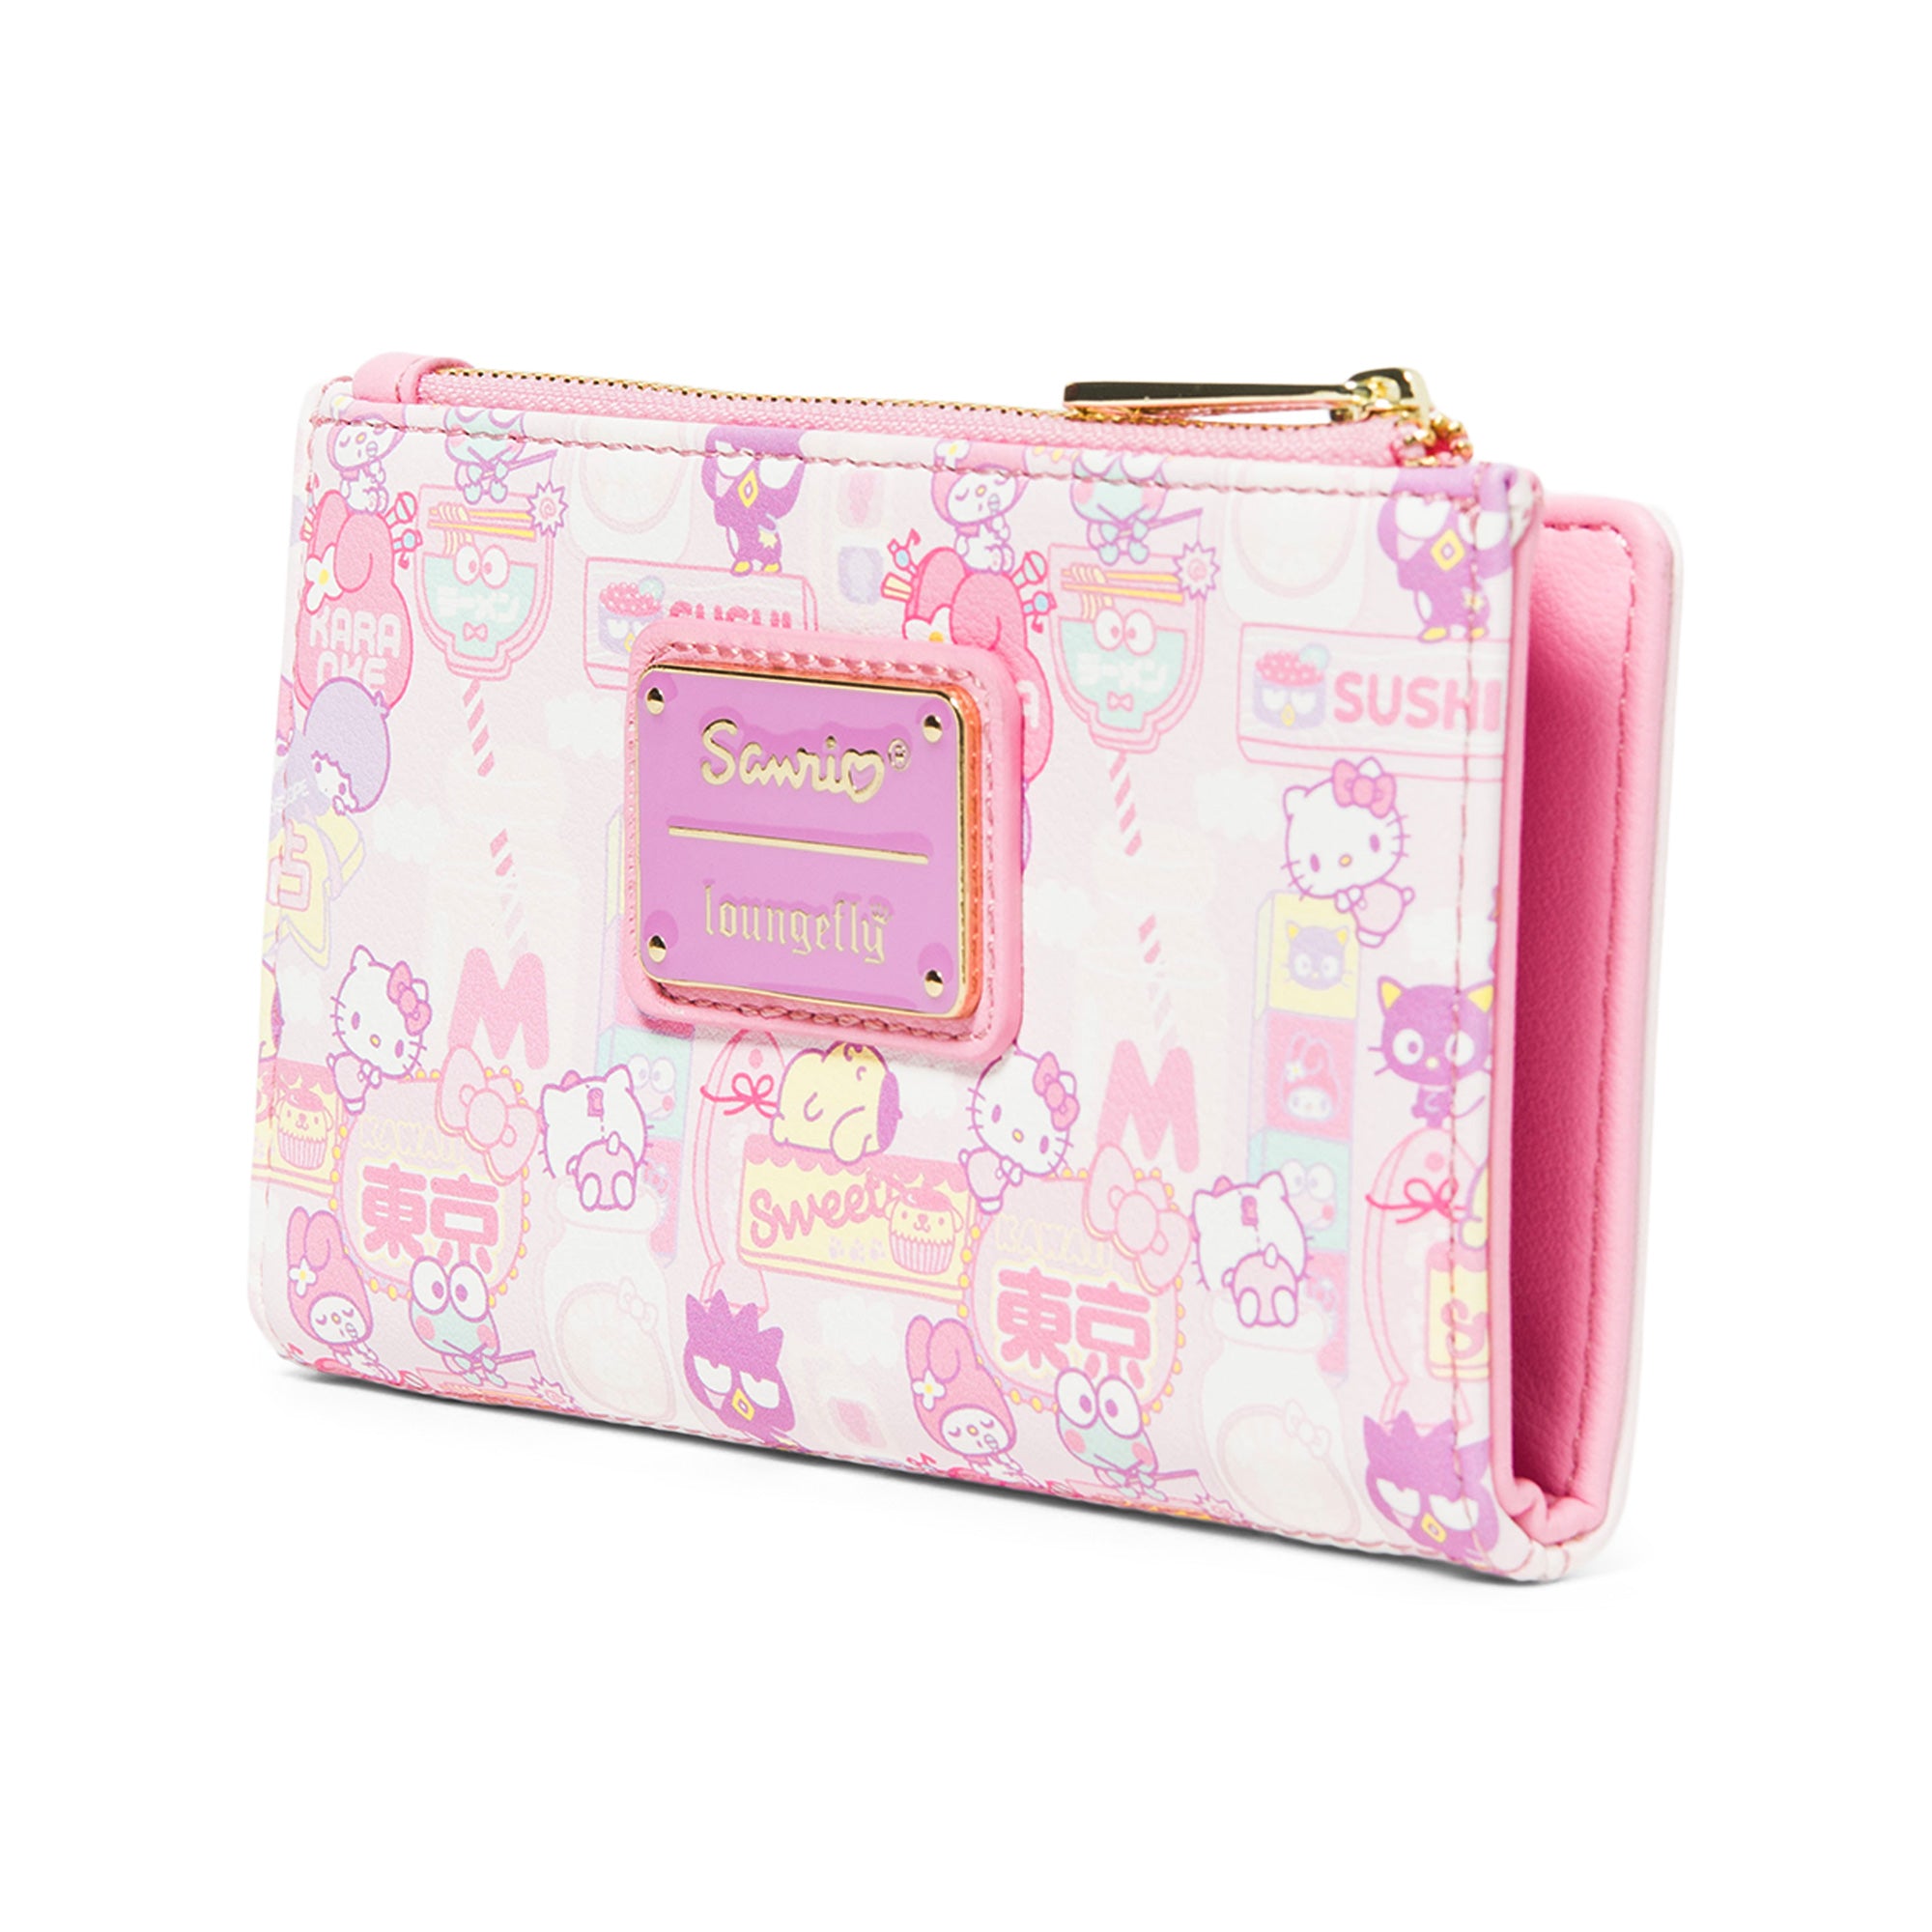 Hello Kitty and Friends x Loungefly Kawaii All-Over Print Wallet Bags Loungefly   